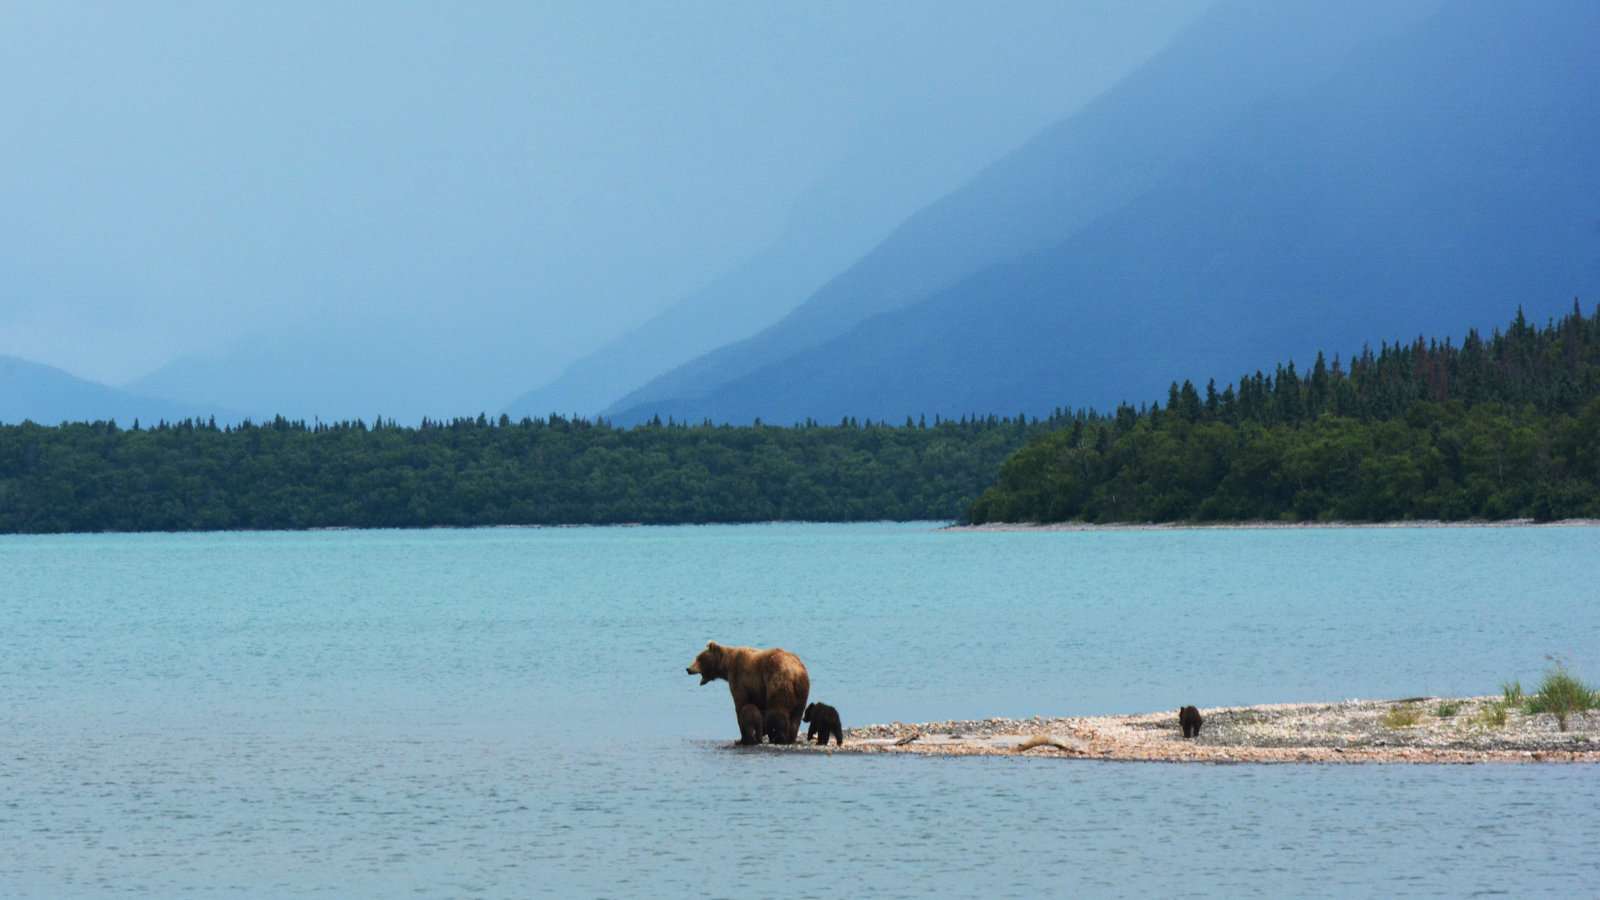 A grizzly bear with two babies standing on a piece of land jutting out into water with trees and a mountain in the background.